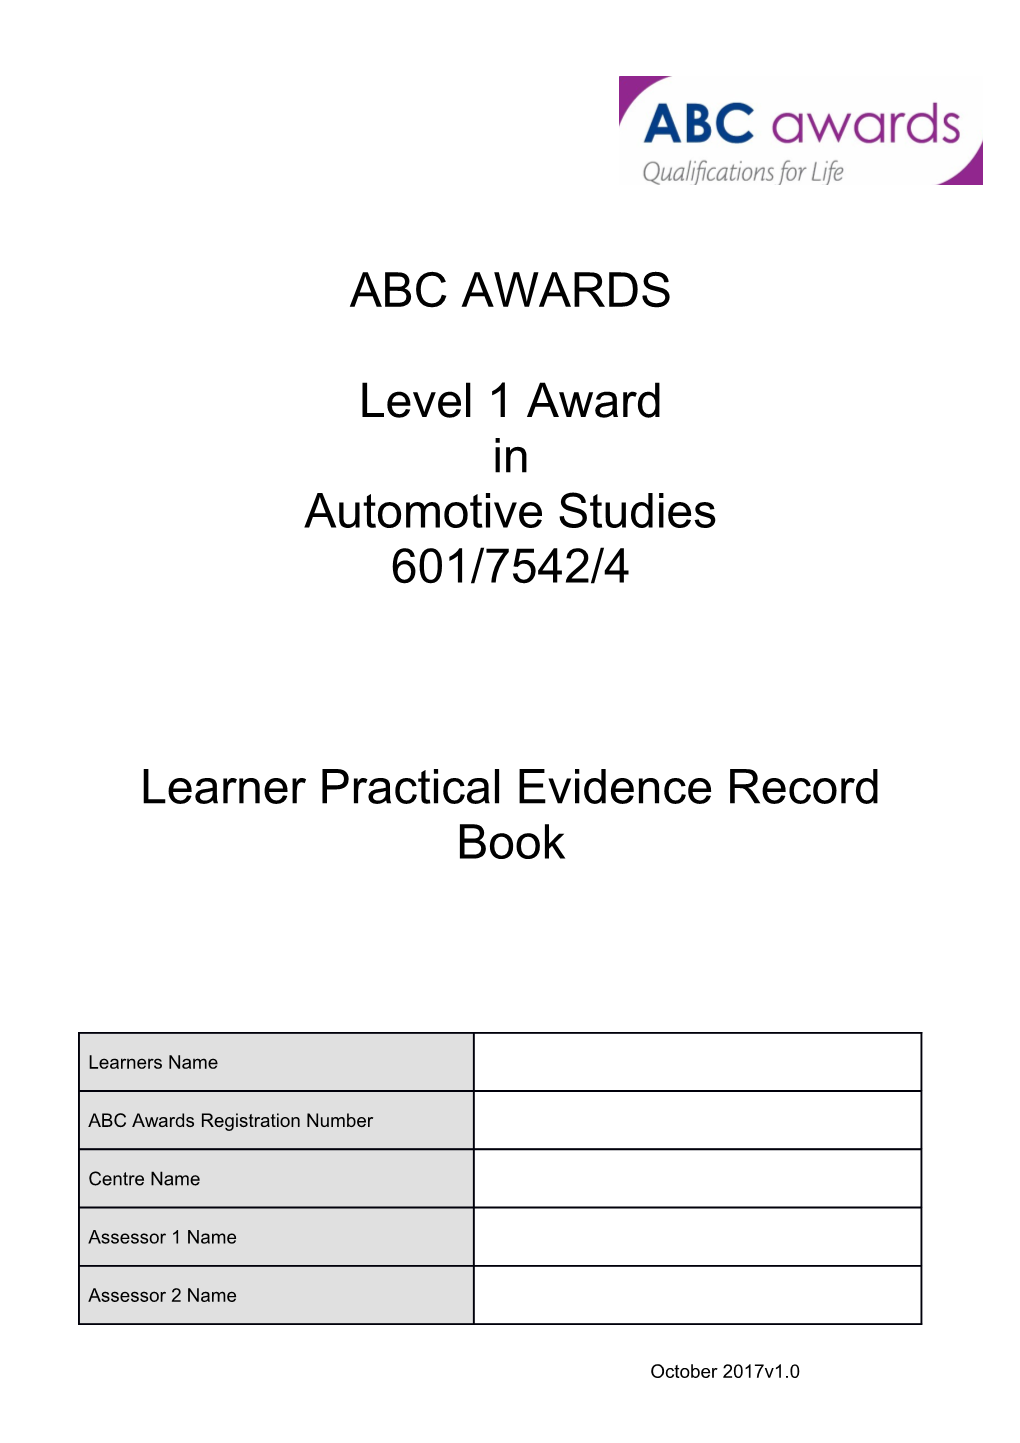 Learner Practical Evidence Record Book